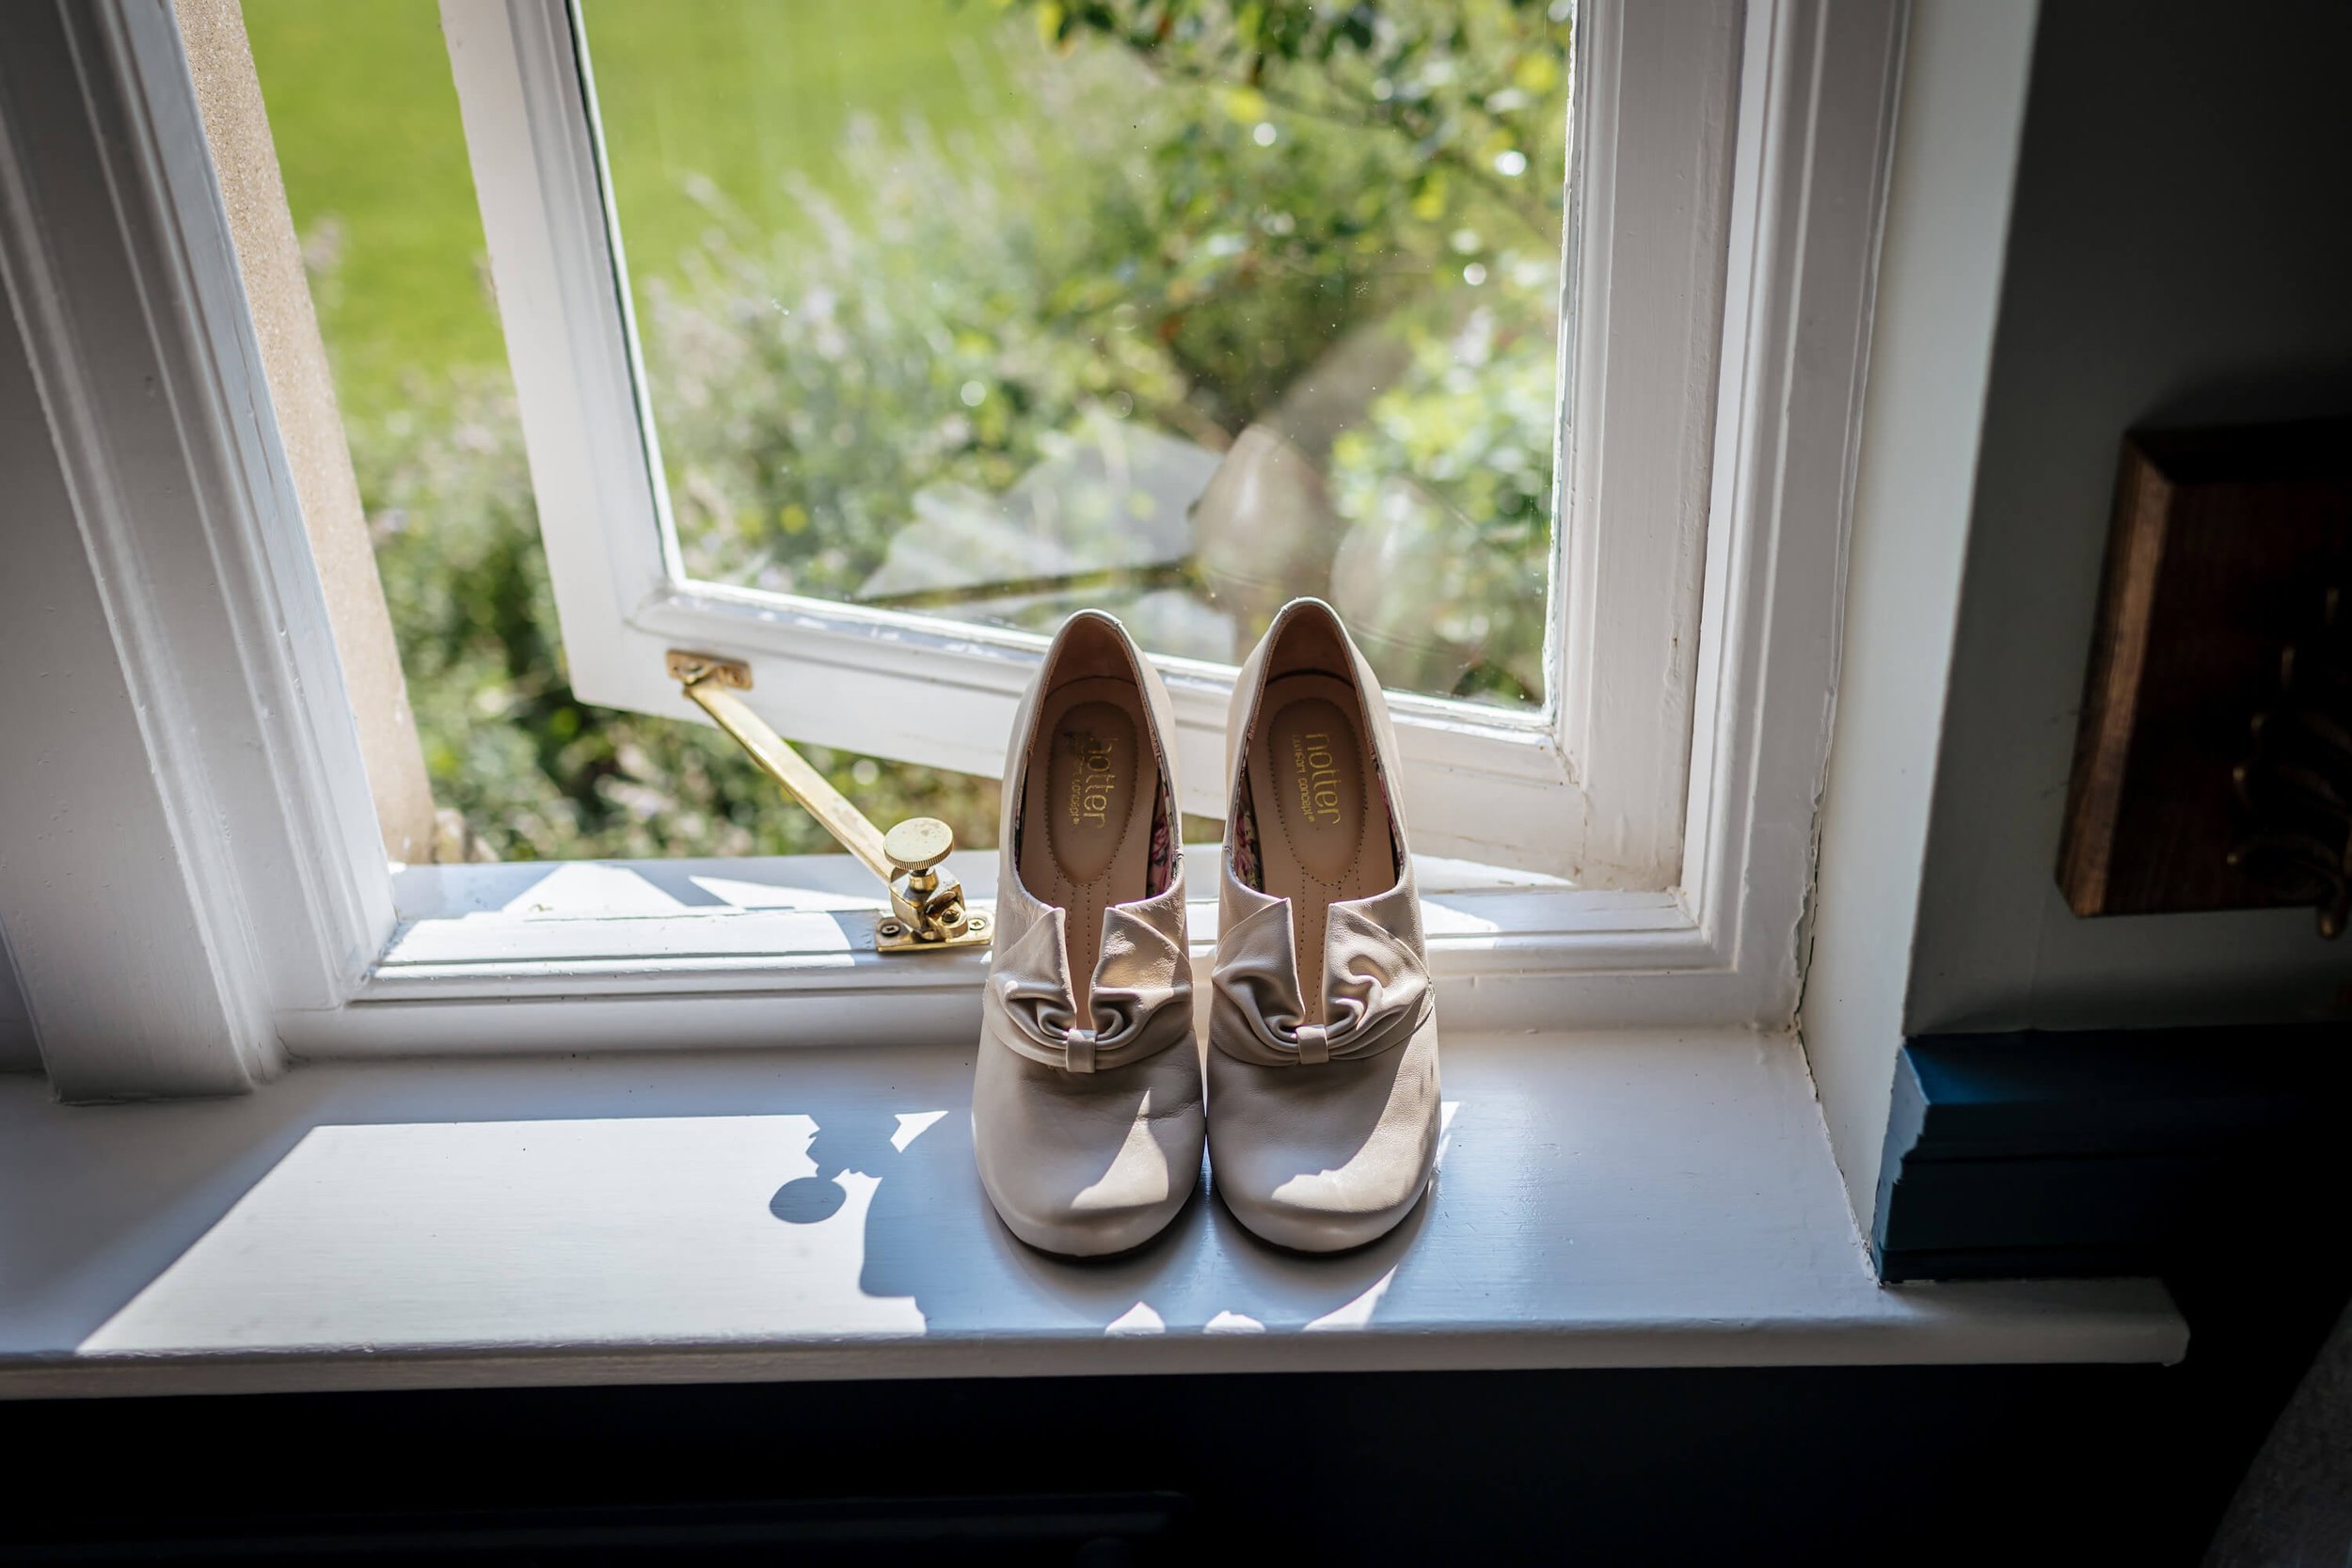 Wedding shoes sitting in the window on a sunny day